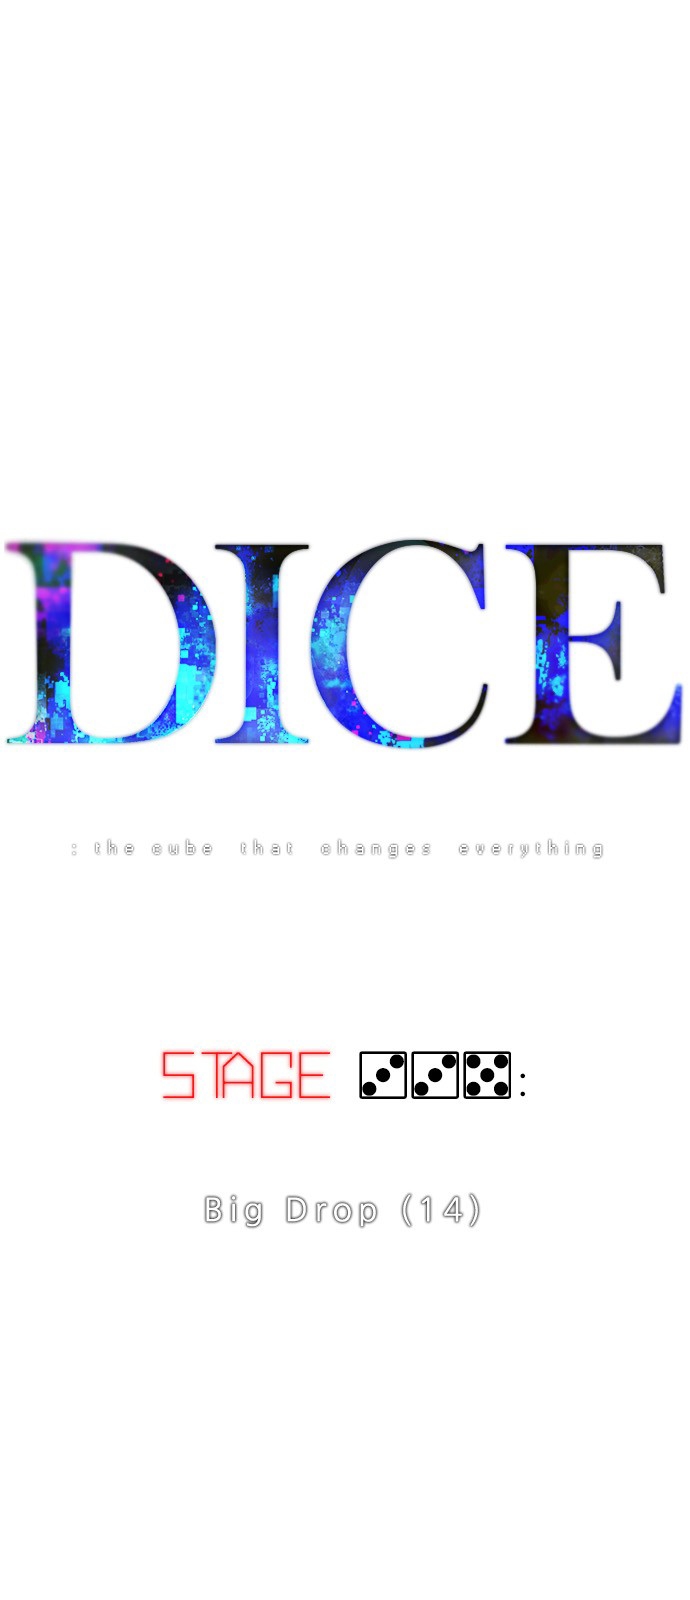 DICE: The Cube That Changes Everything Ch. 335 Big Drop (14)